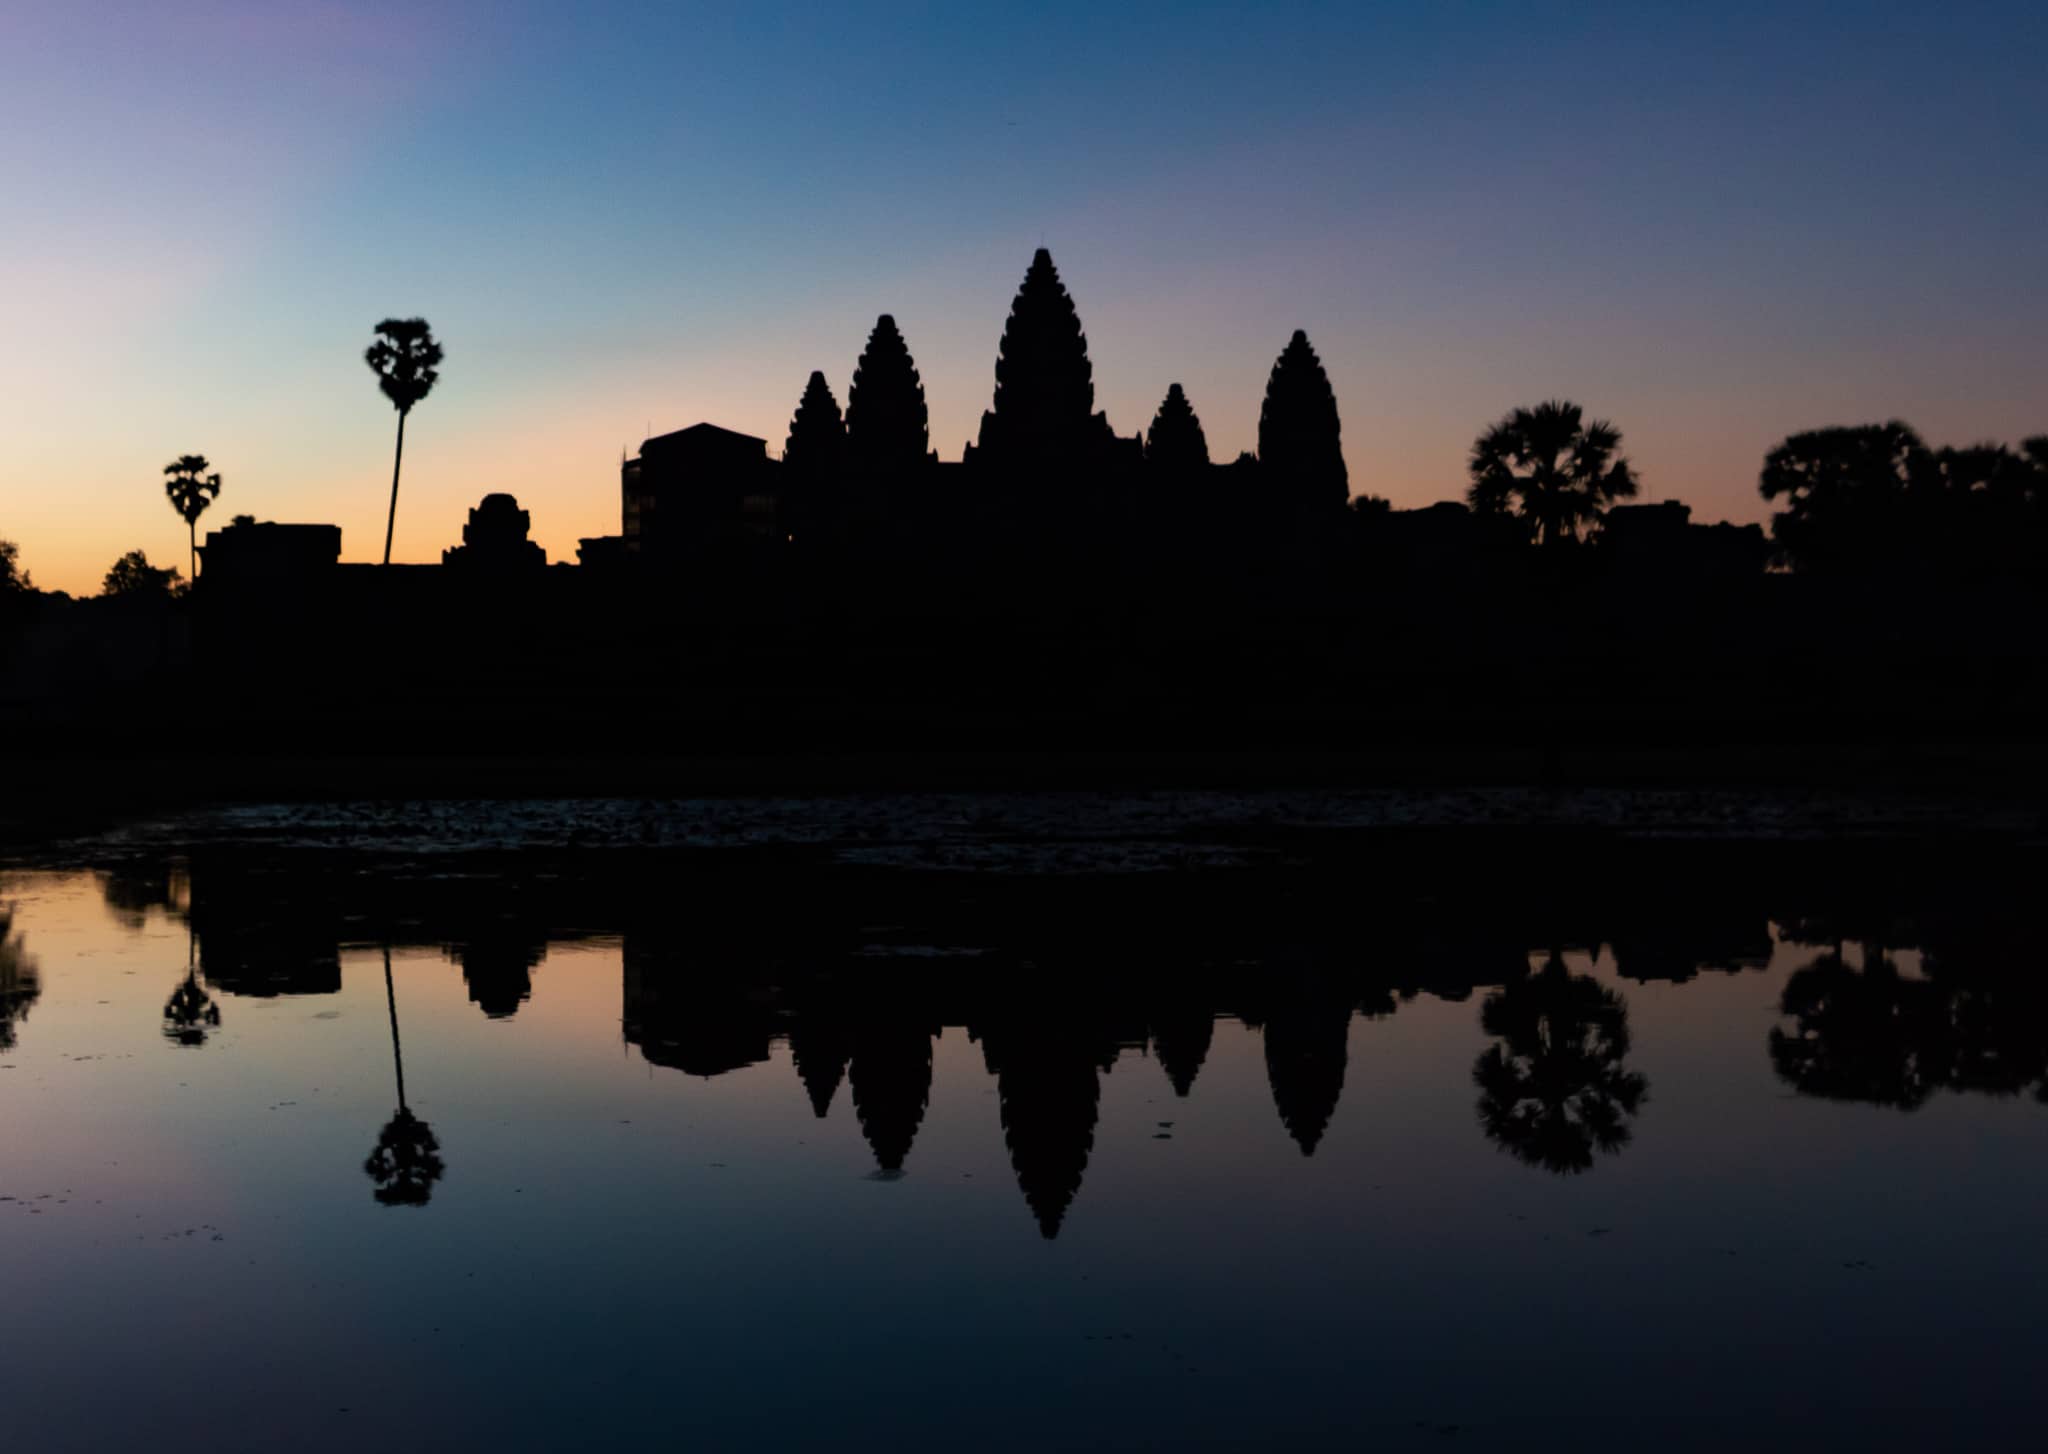 Sunrise at Angkor Wat is incredibly popular all year round, get there early if you want a good spot!